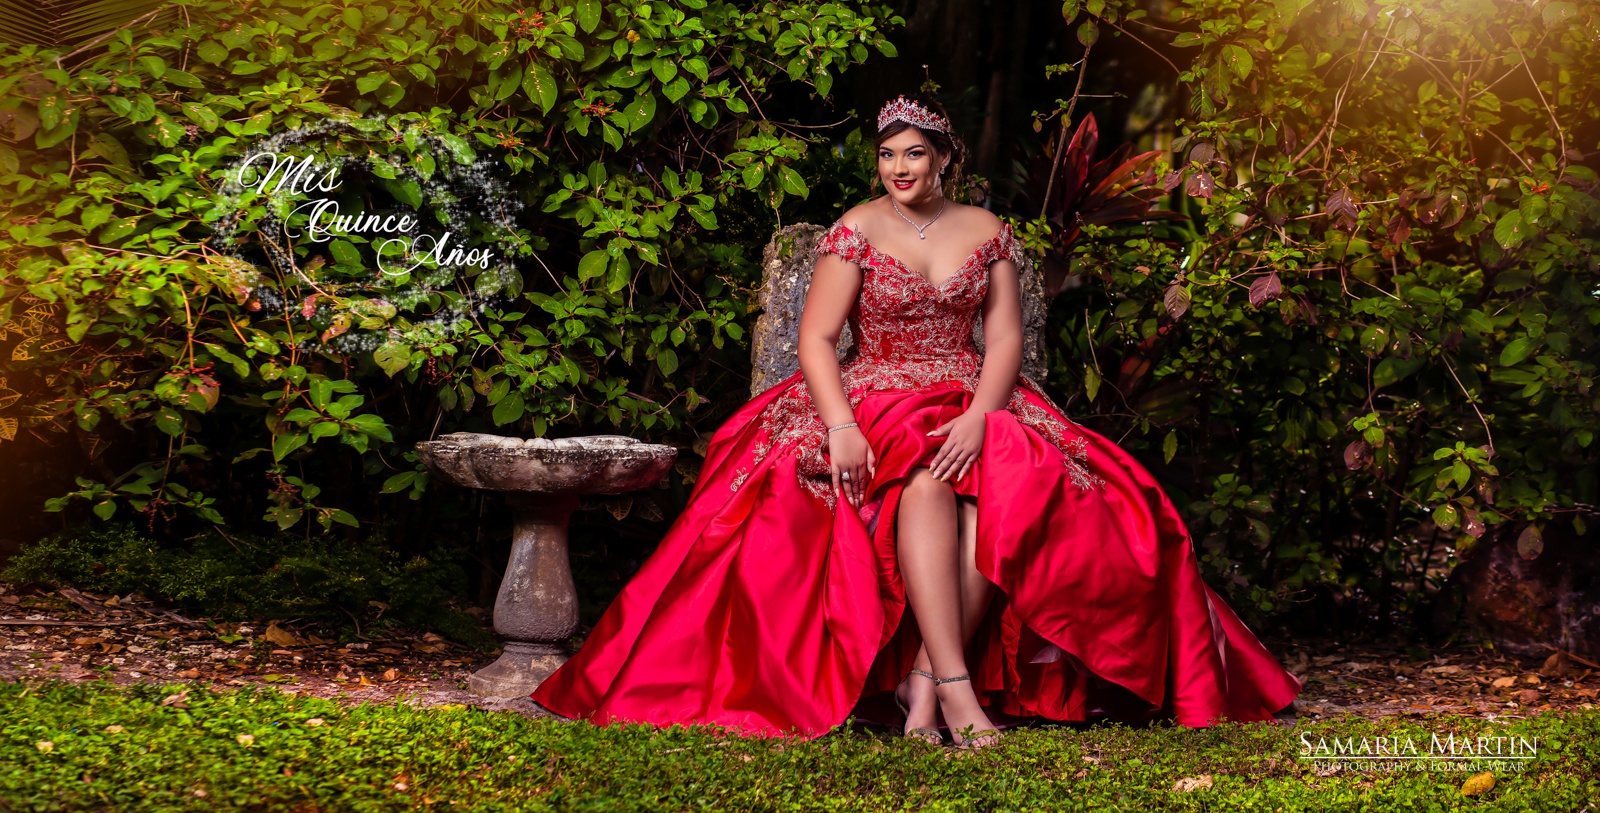 Fashion photoshoot, best quinceanera pictures in Miami, Samaria Martin Photographer, where to rent quinceanera dresses, quinceanera dress collection 3